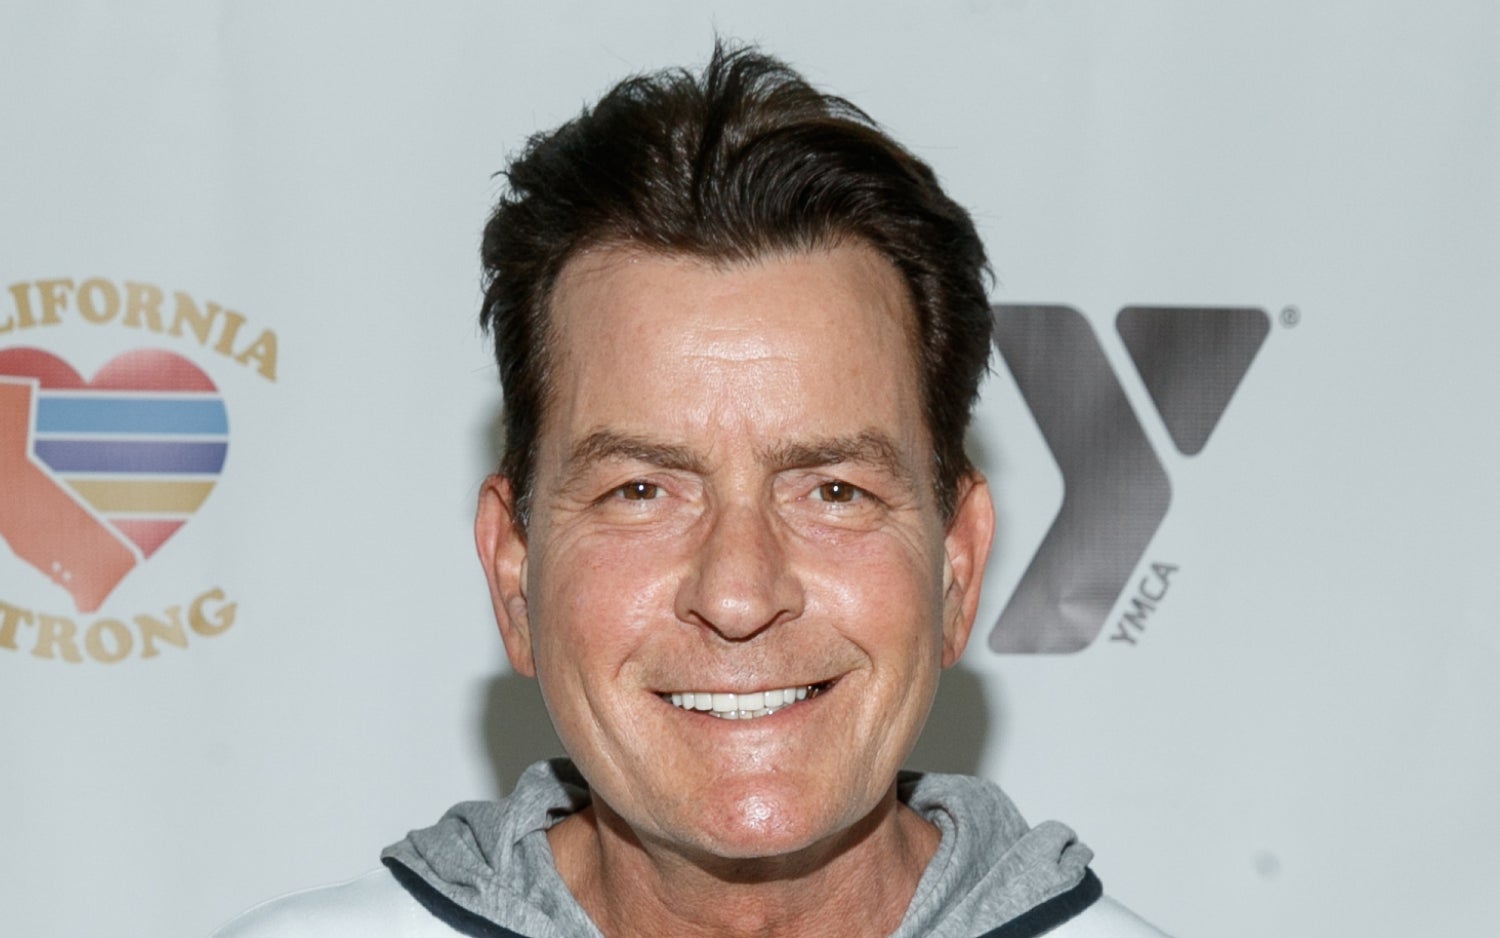 CHARLIE SHEEN'S NEIGHBOUR HAS REPORTEDLY BEEN ARRESTED AFTER TRYING TO 'CHOKE' THE STAR